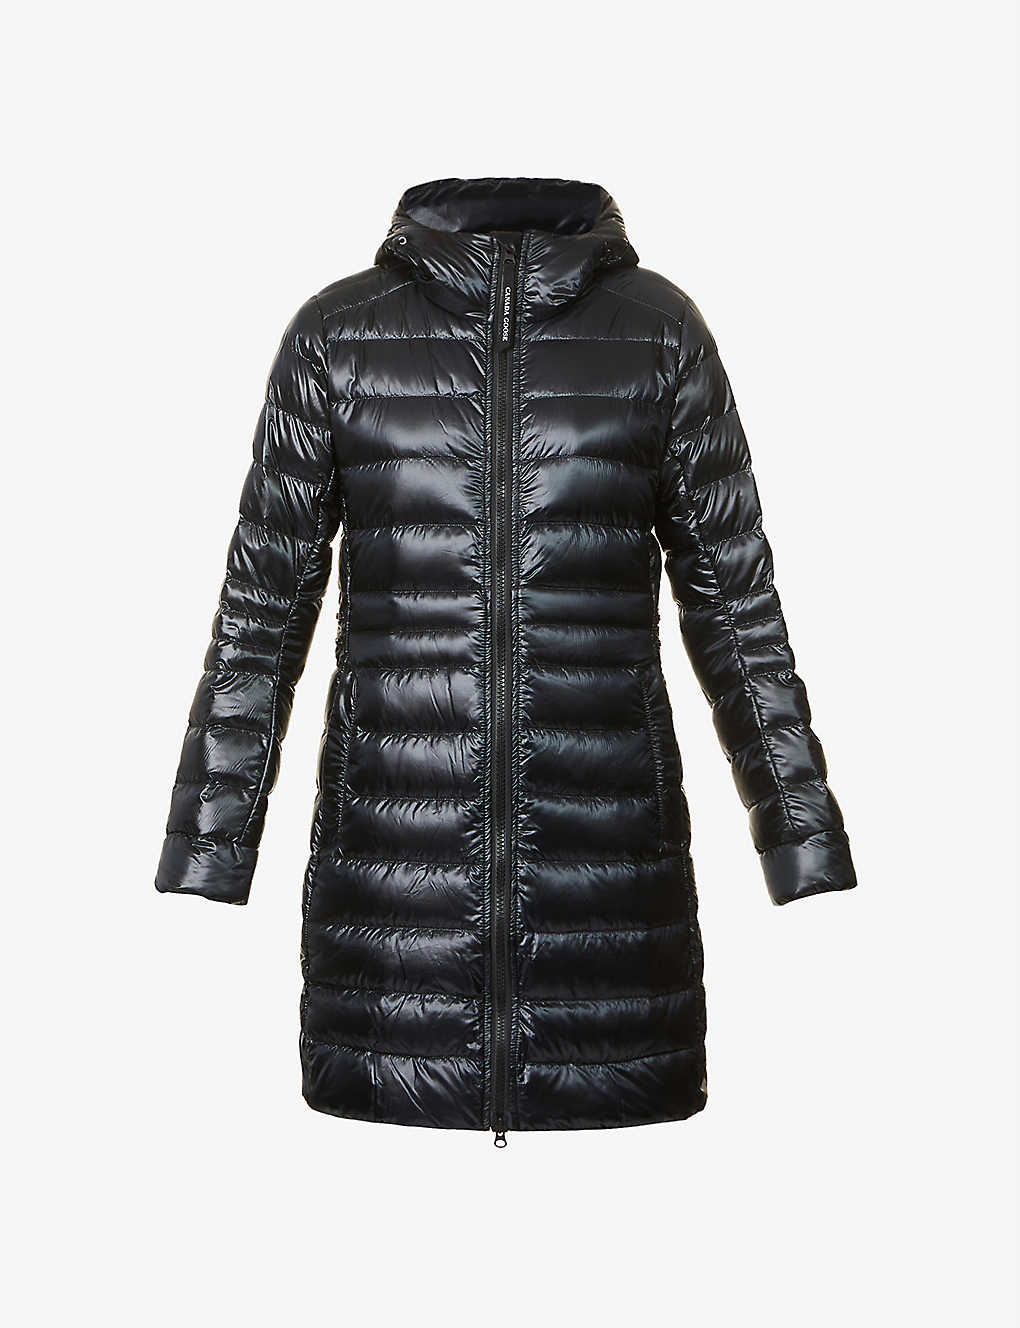 CANADA GOOSE CANADA GOOSE WOMENS BLACK CYPRESS HOODED SHELL-DOWN JACKET,43989779